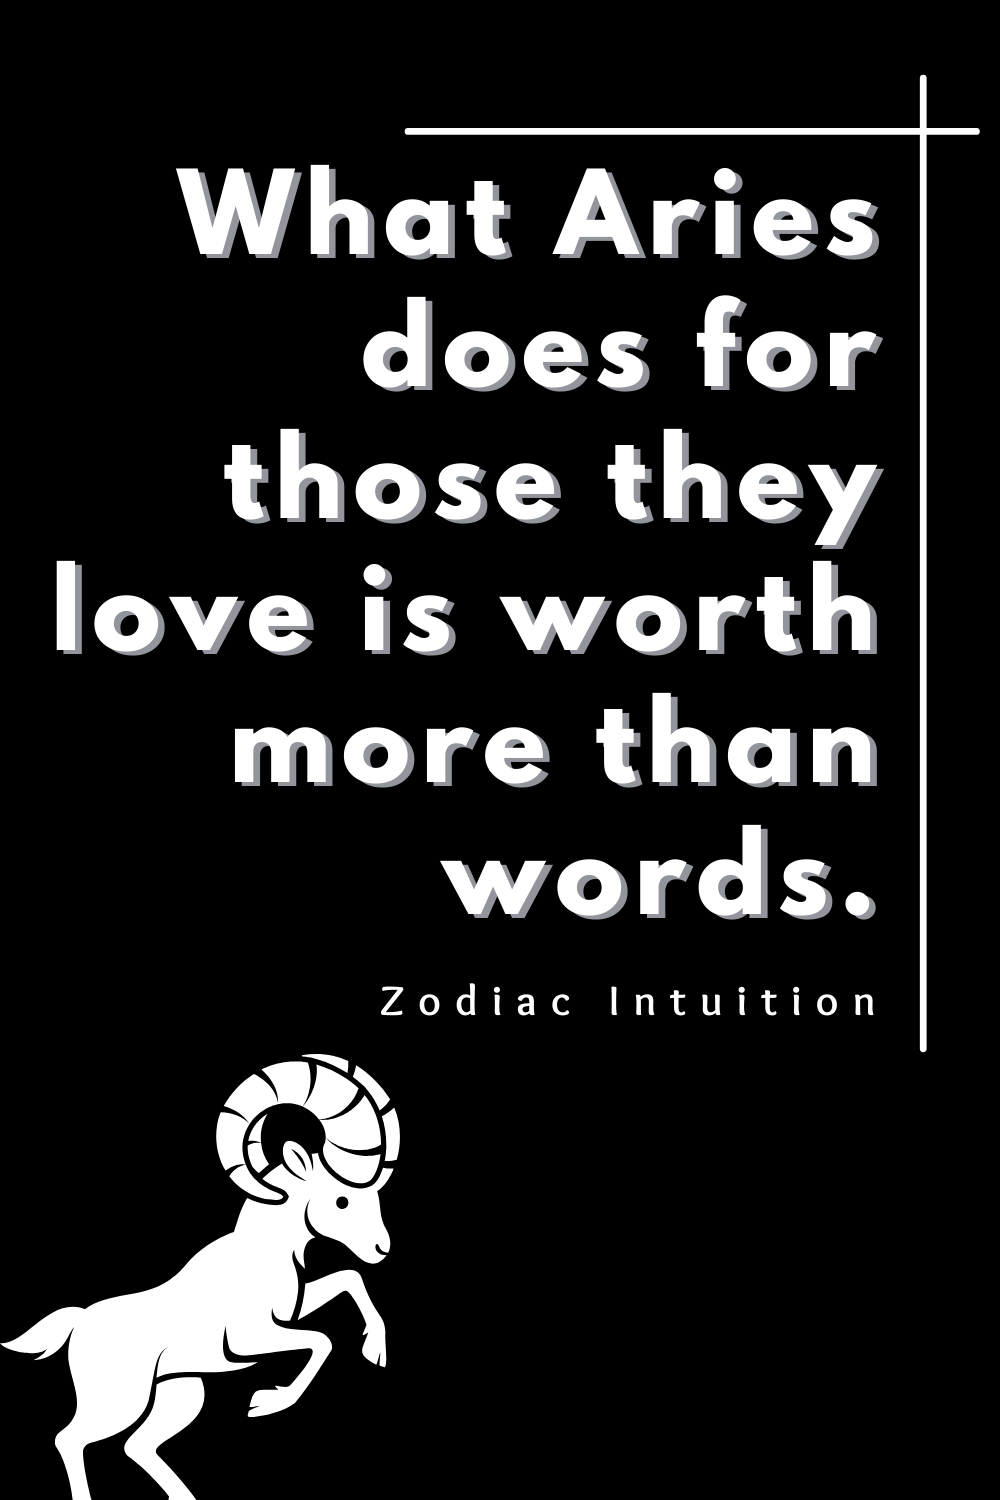 What Aries does for those they love is worth more than words.